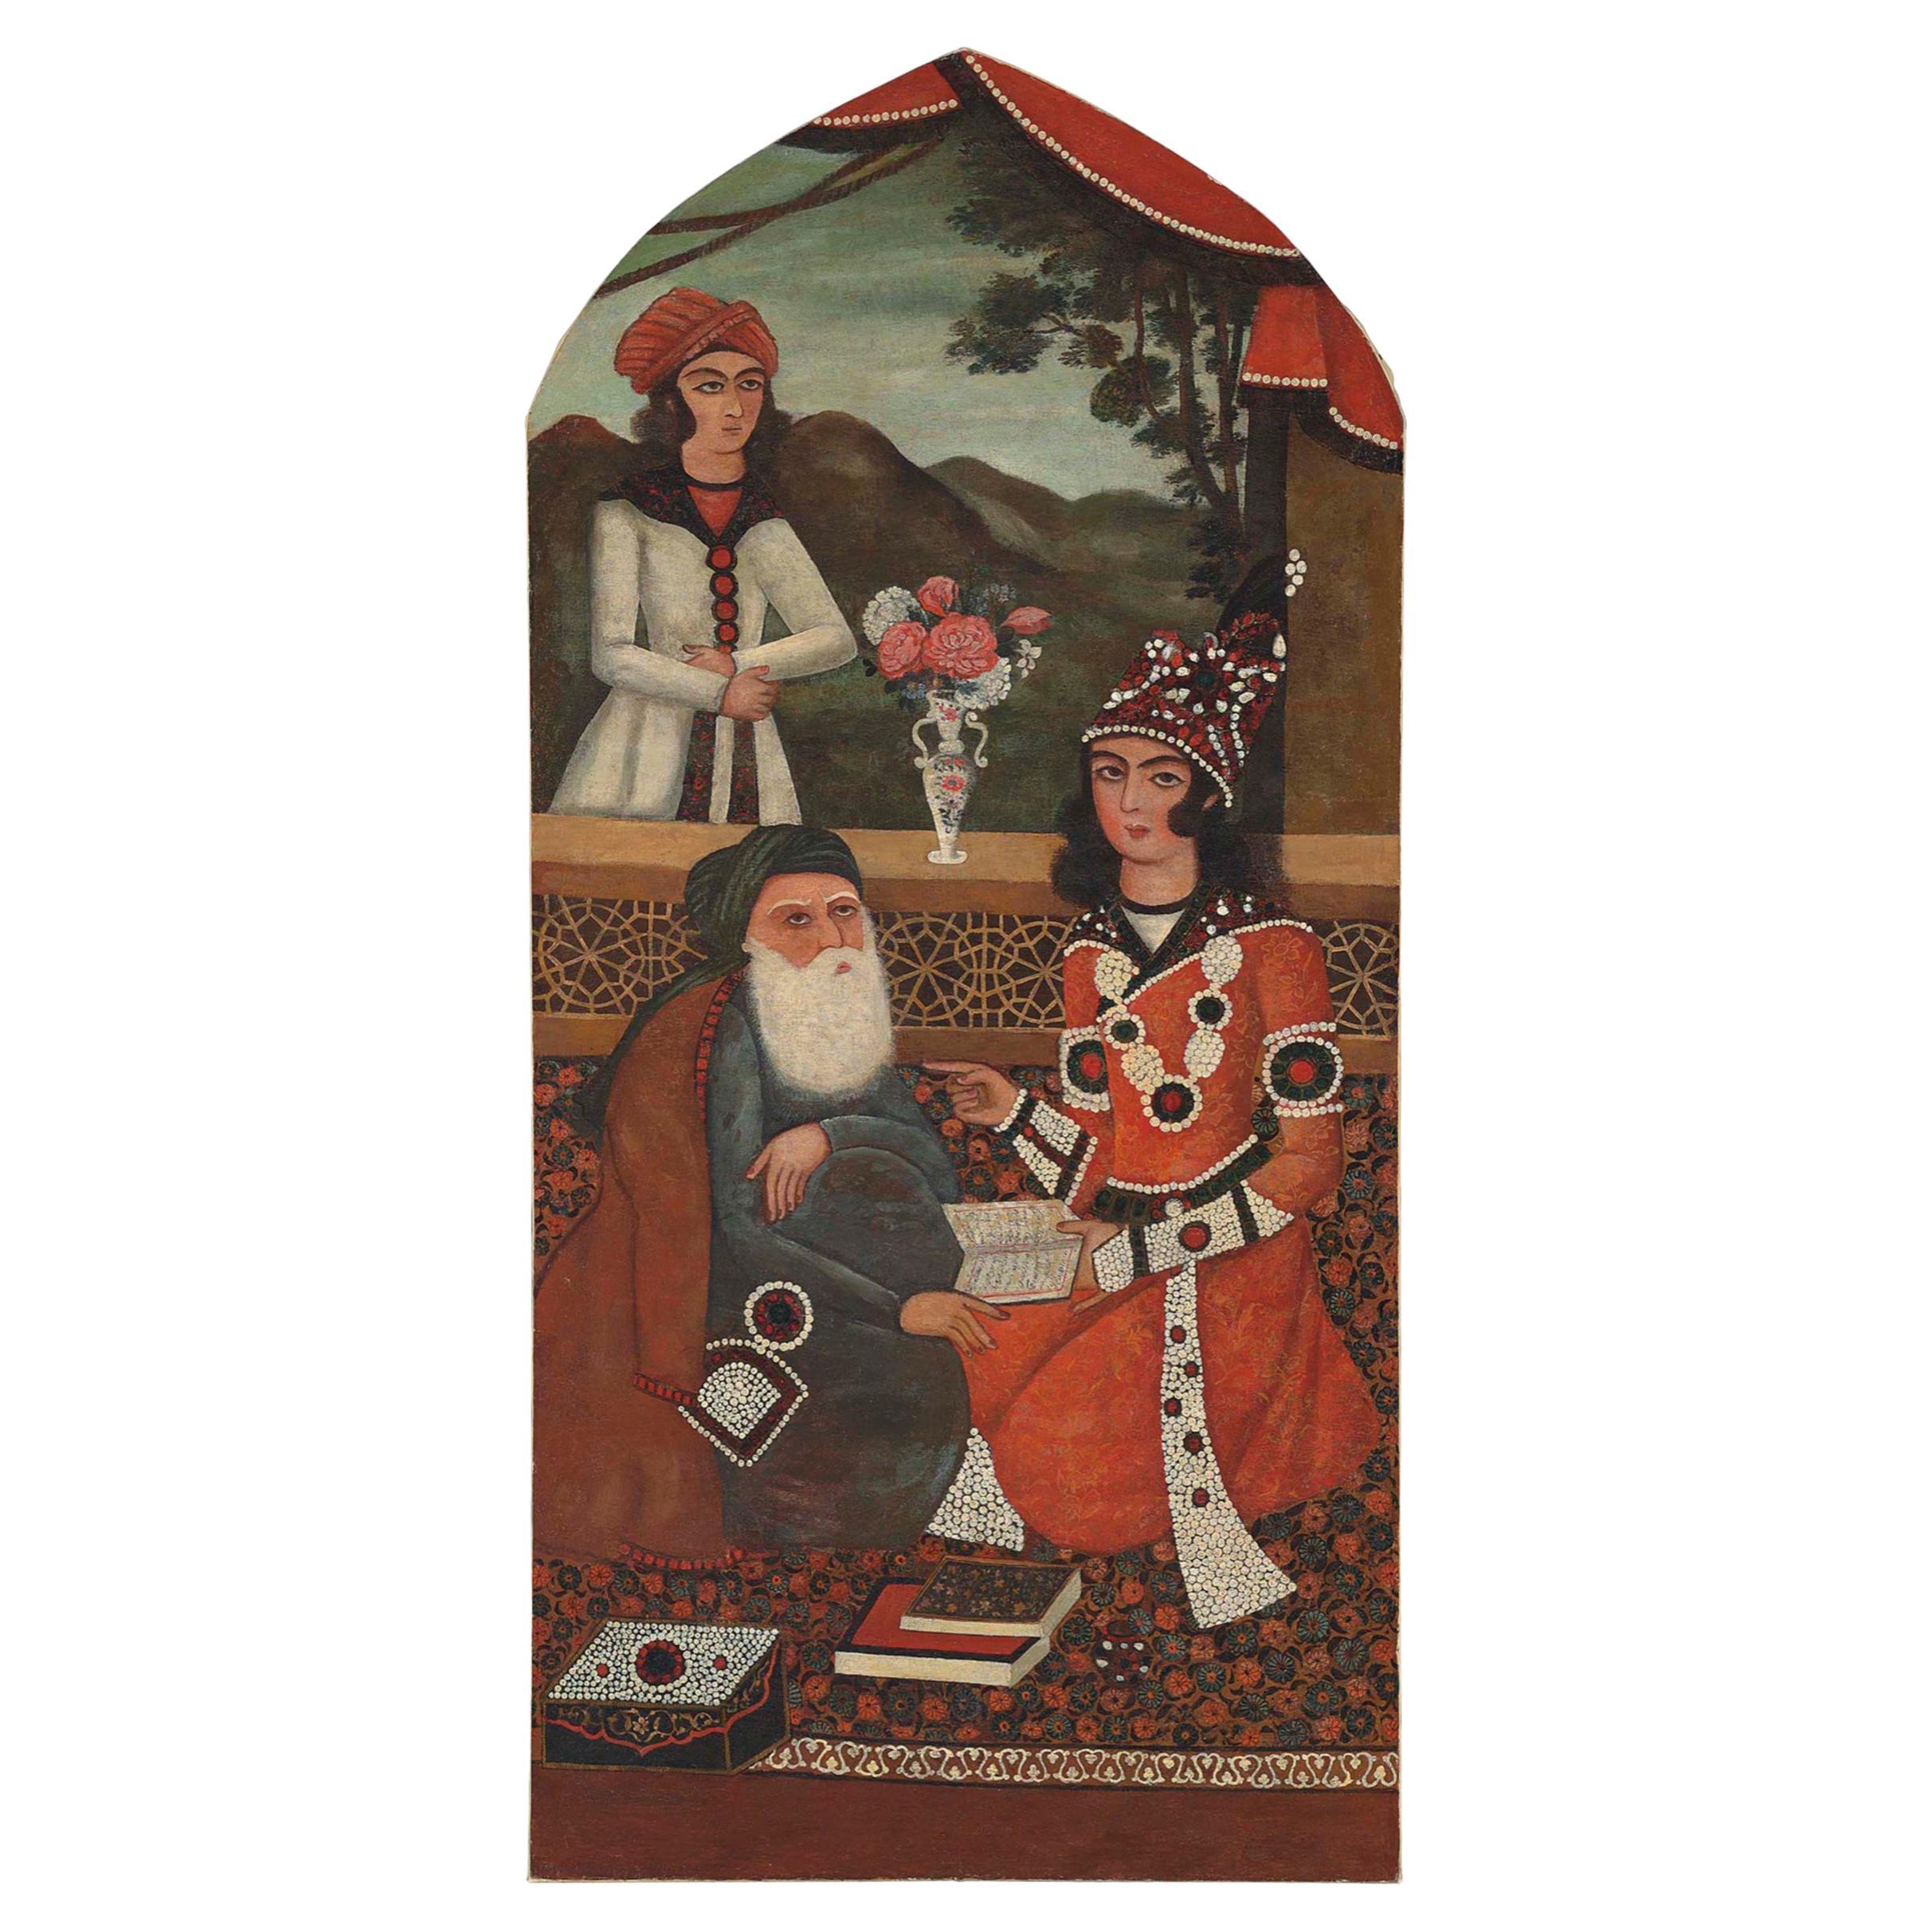 Qajar Painting Depicts Sage And His Pupil, Iran, 19th Century